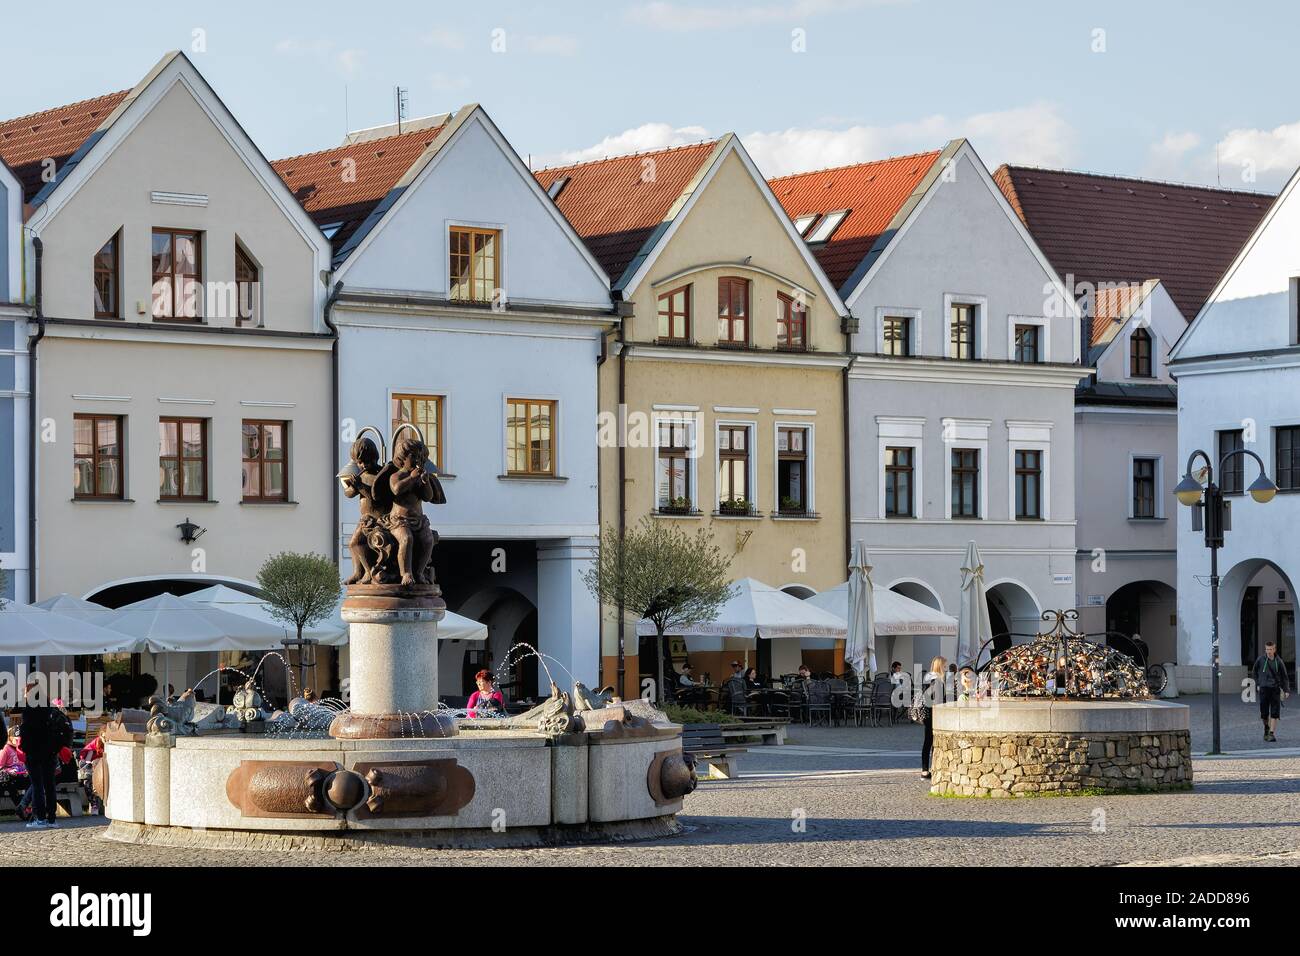 Zilina, Slovakia, April 30, 2016 - View of Marianske Square with burgher houses in Zilina, Slovakia. Stock Photo